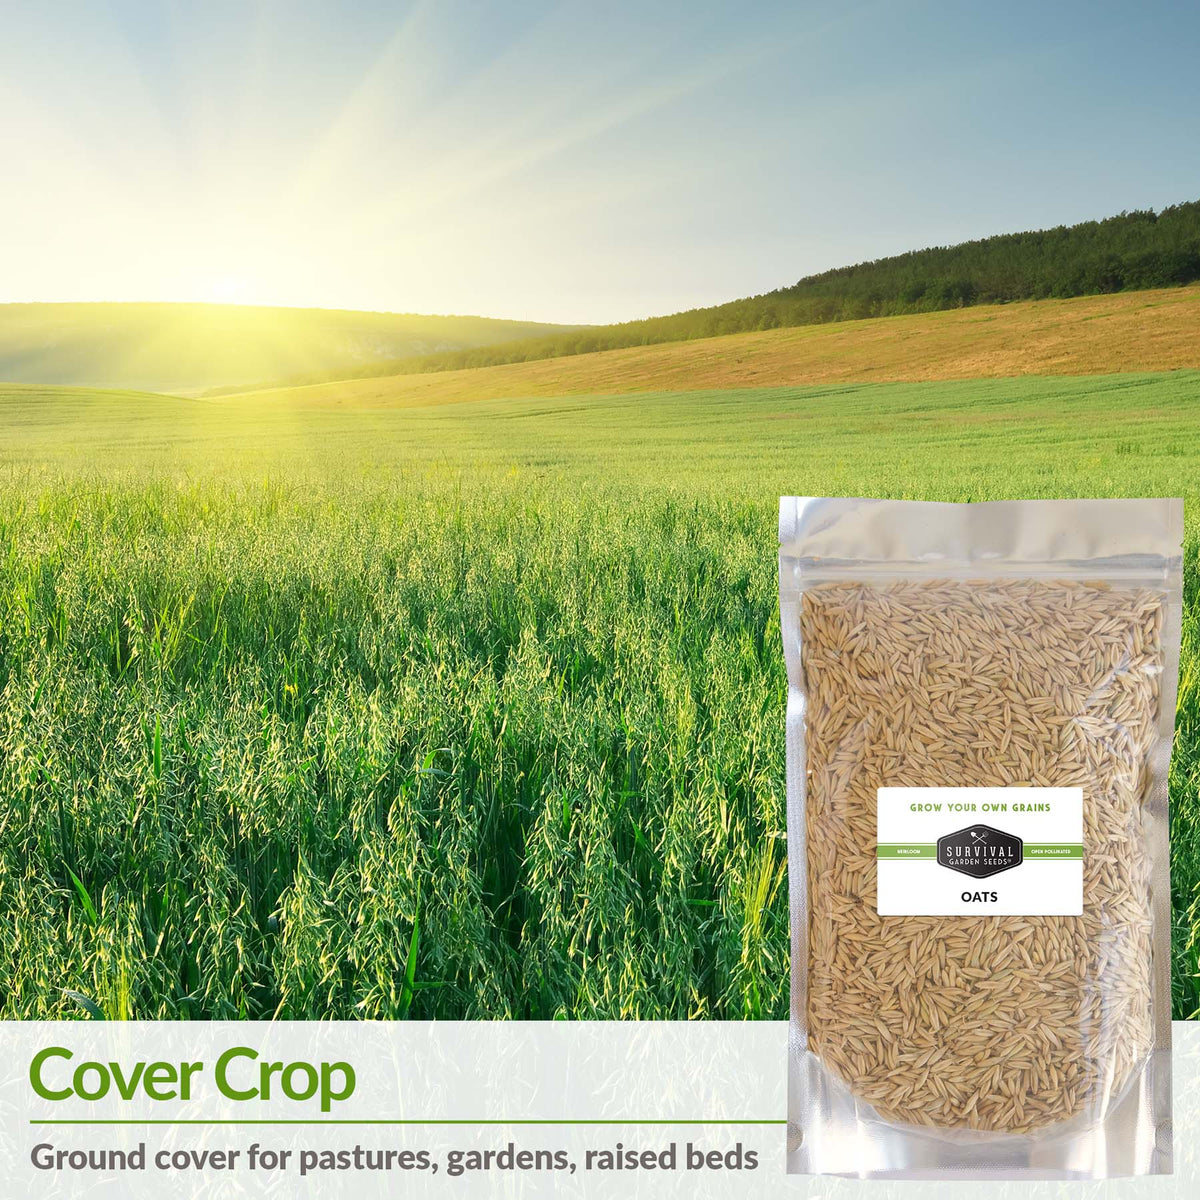 Oats are a cover crop good for pastures, gardens and raised beds